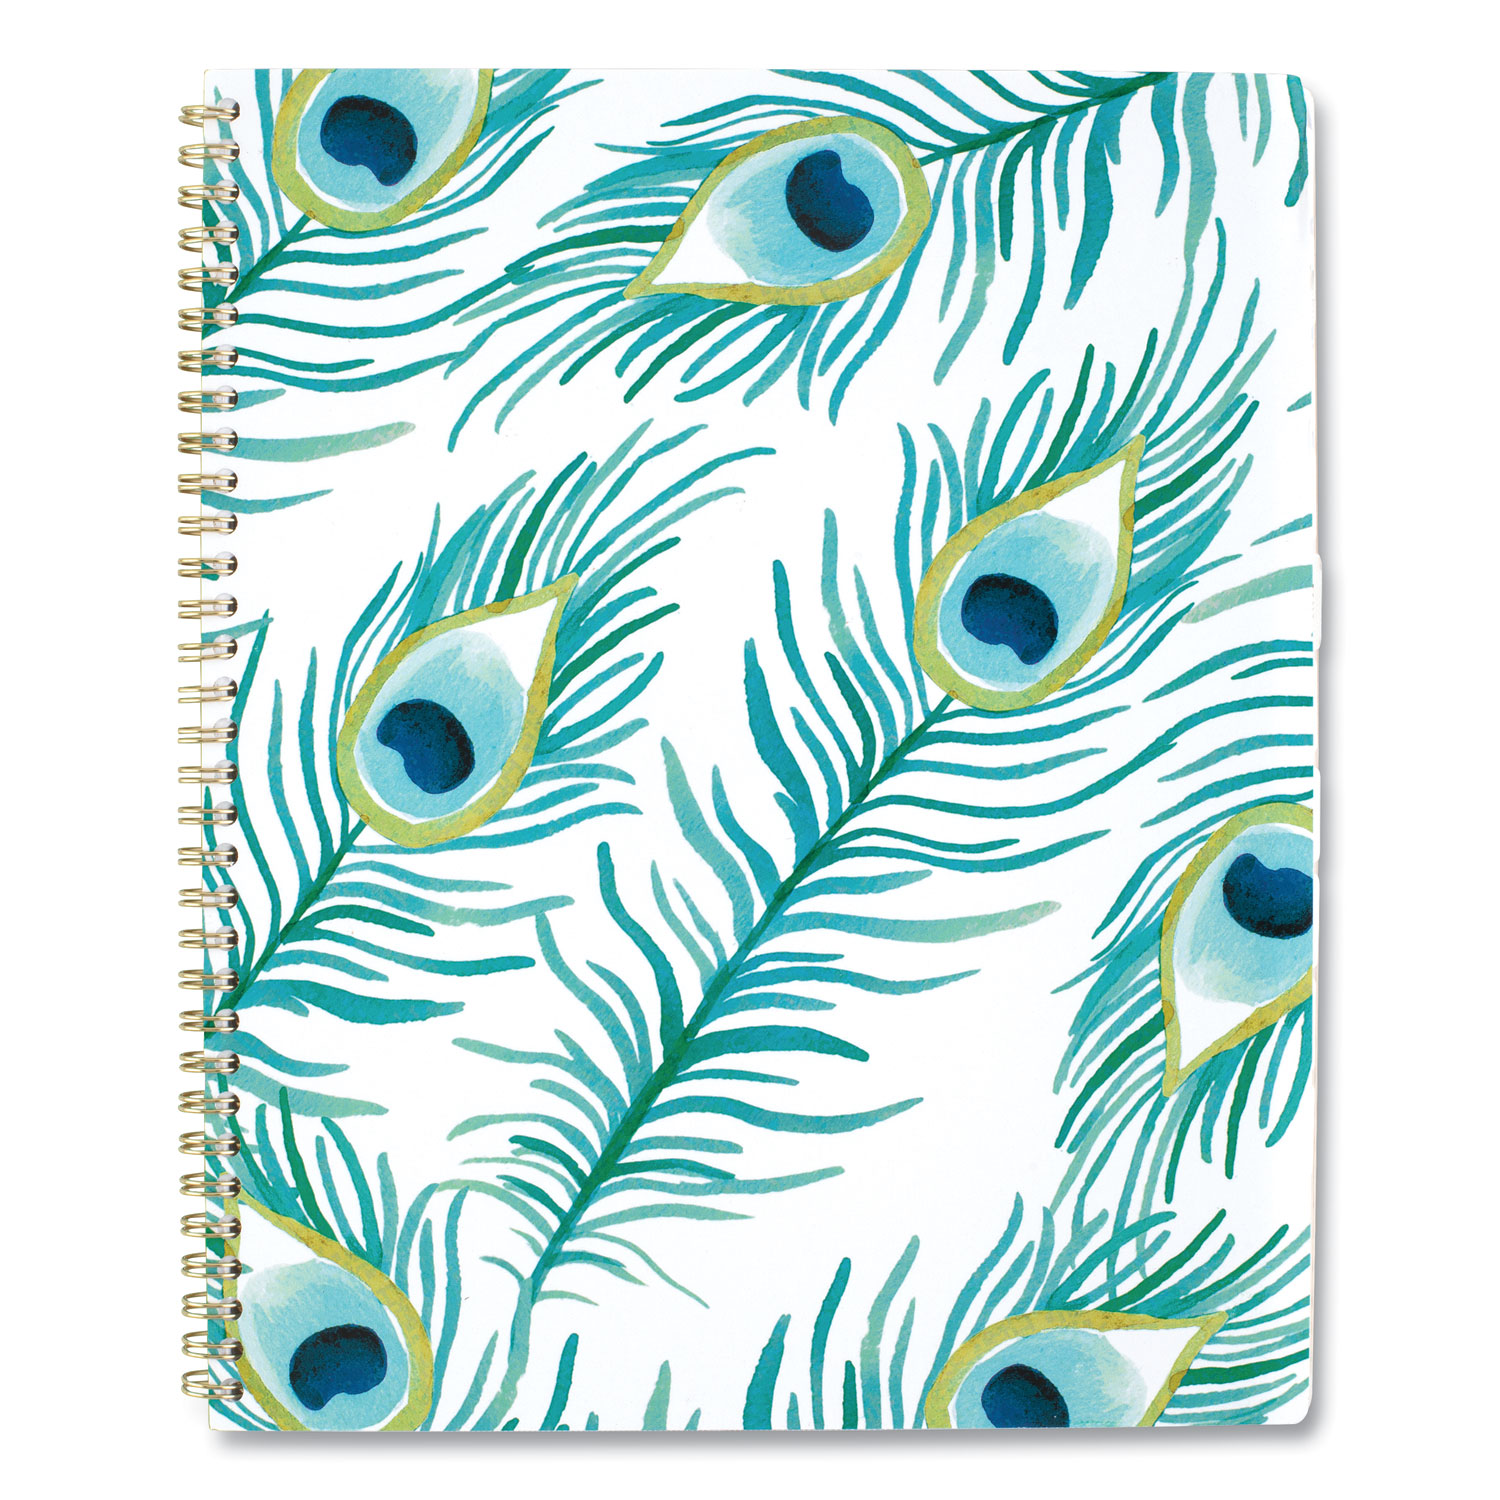  Cambridge 1453905 Peacock Weekly/Monthly Planner, 11 x 8.5, White/Green/Blue, 2021 (AAG1453905) 